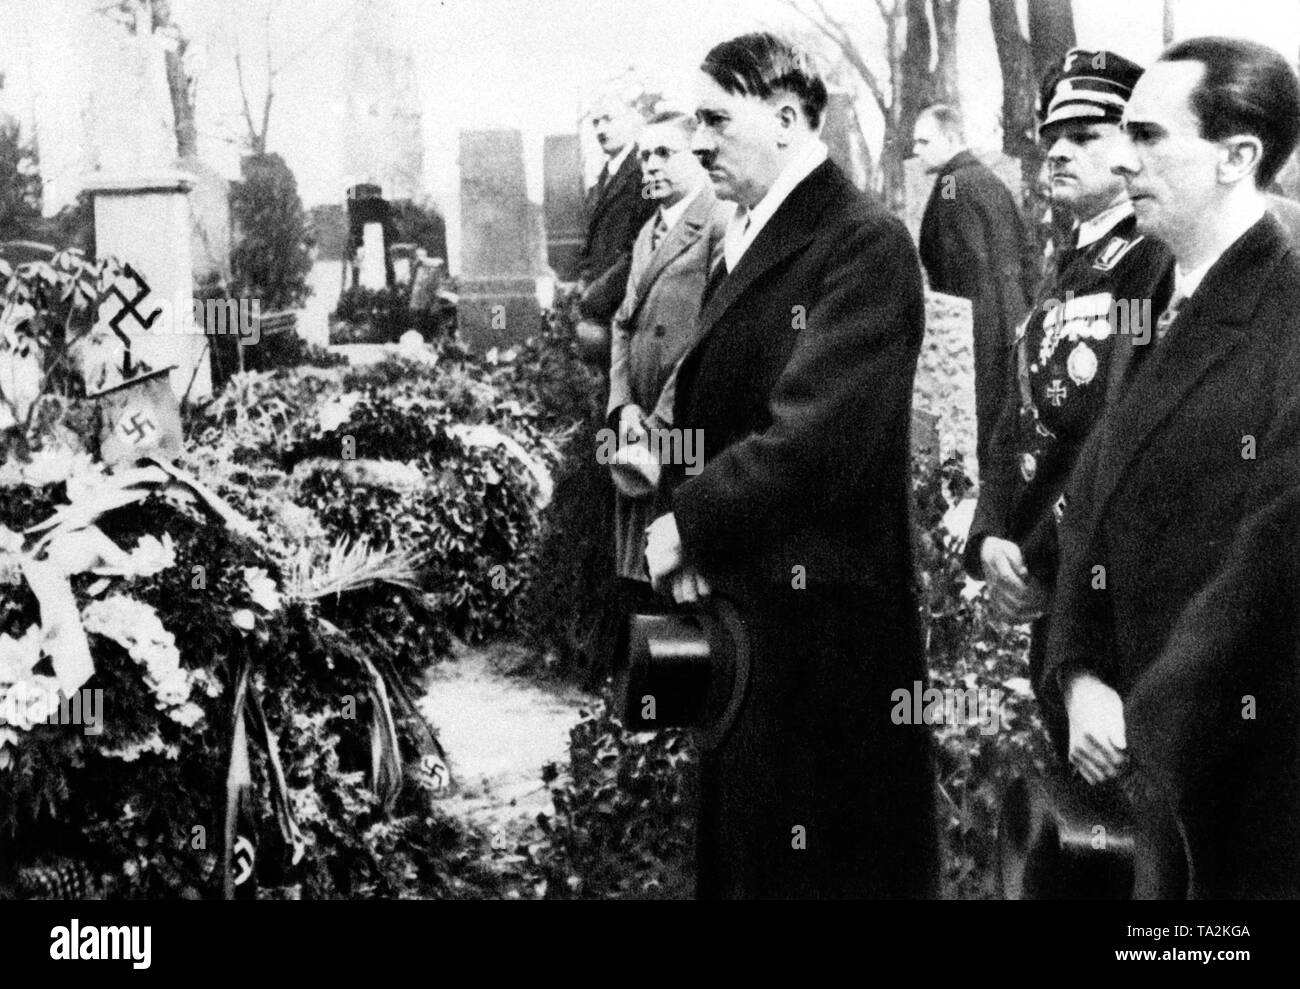 Adolf Hitler, Sepp Dietrich and Josef Goebbels at the Luisenstadt cemetery in Berlin before the opening of the Reichstag in Potsdam on the 21st of March, 1933. Stock Photo